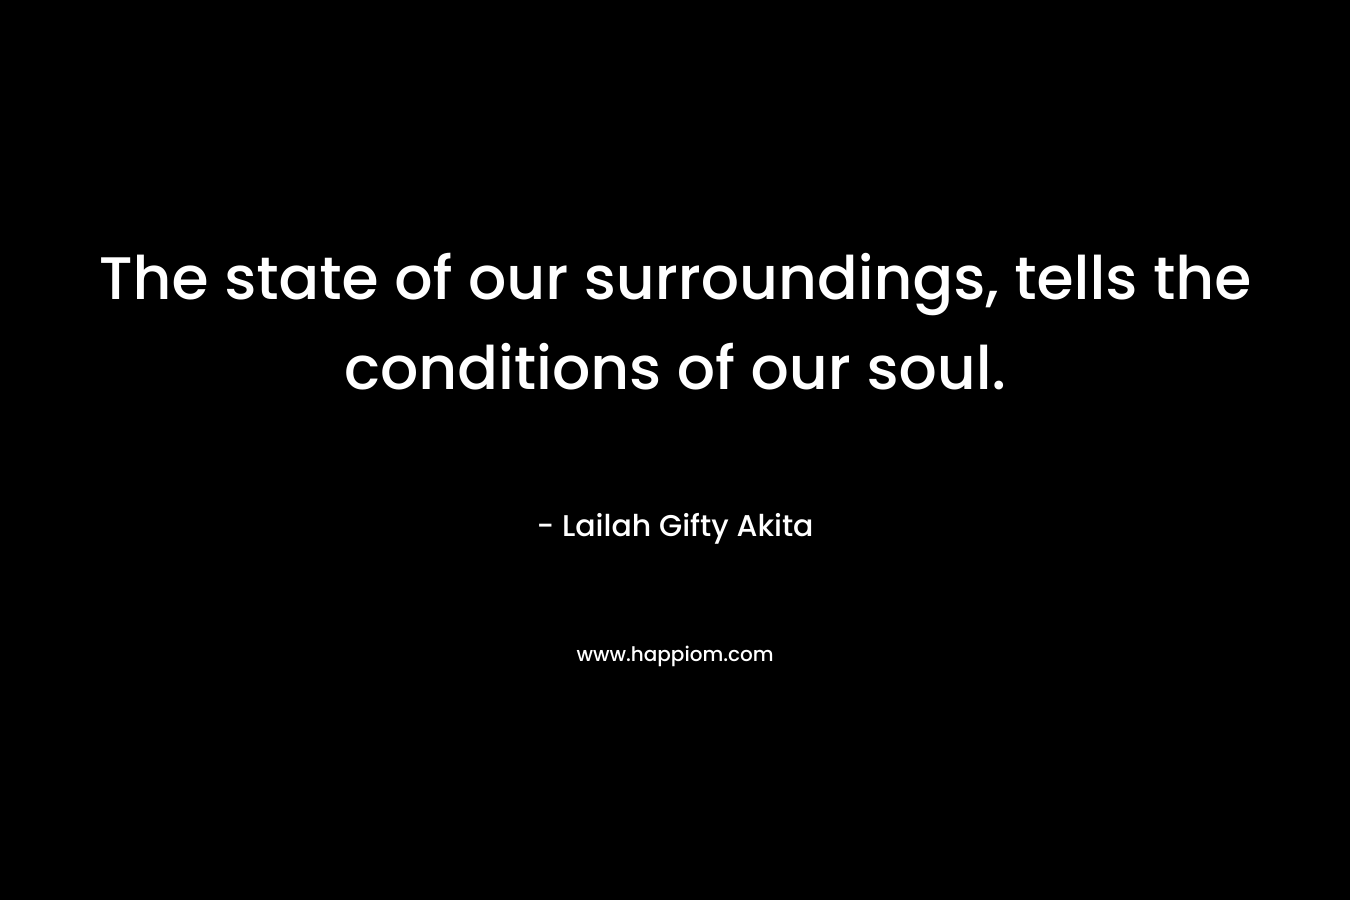 The state of our surroundings, tells the conditions of our soul.